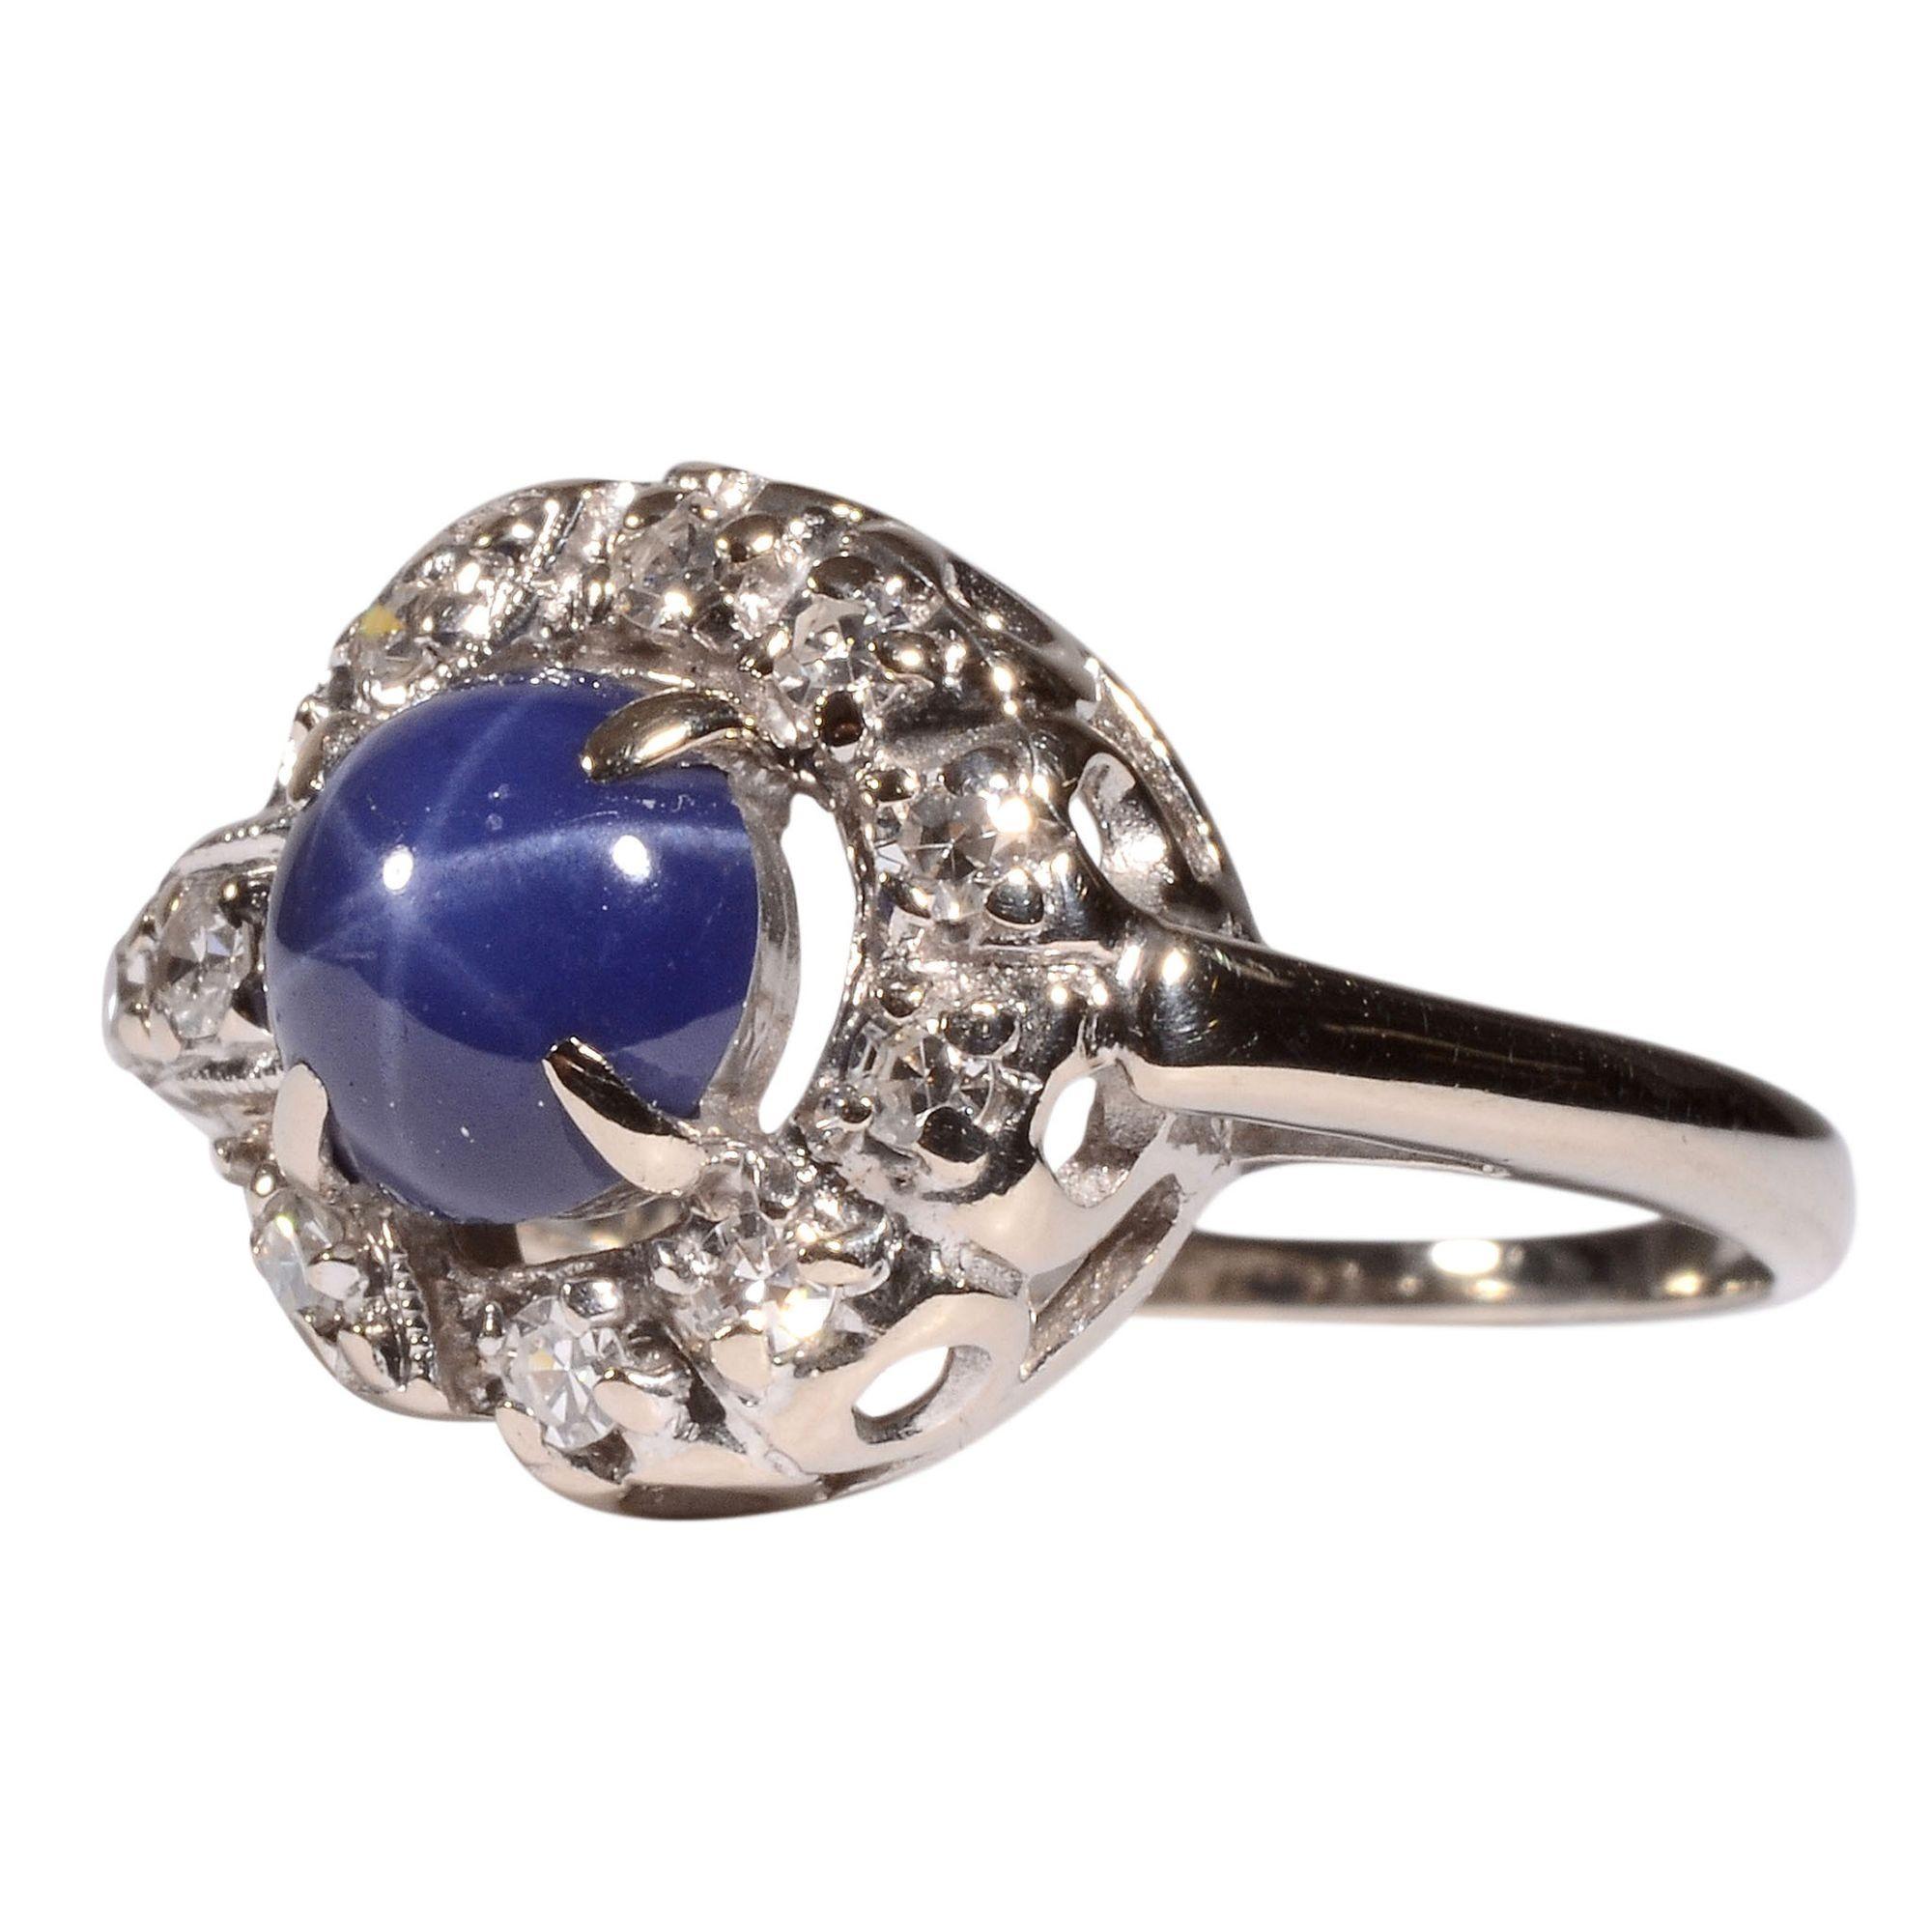 Estate synthetic star sapphire & diamond ring. This 14 karat white gold ring features a synthetic star sapphire accented with 10 single cut diamonds at .16 carat total weight. The diamonds have VS2 clarity and G-I color. This estate ring is a size